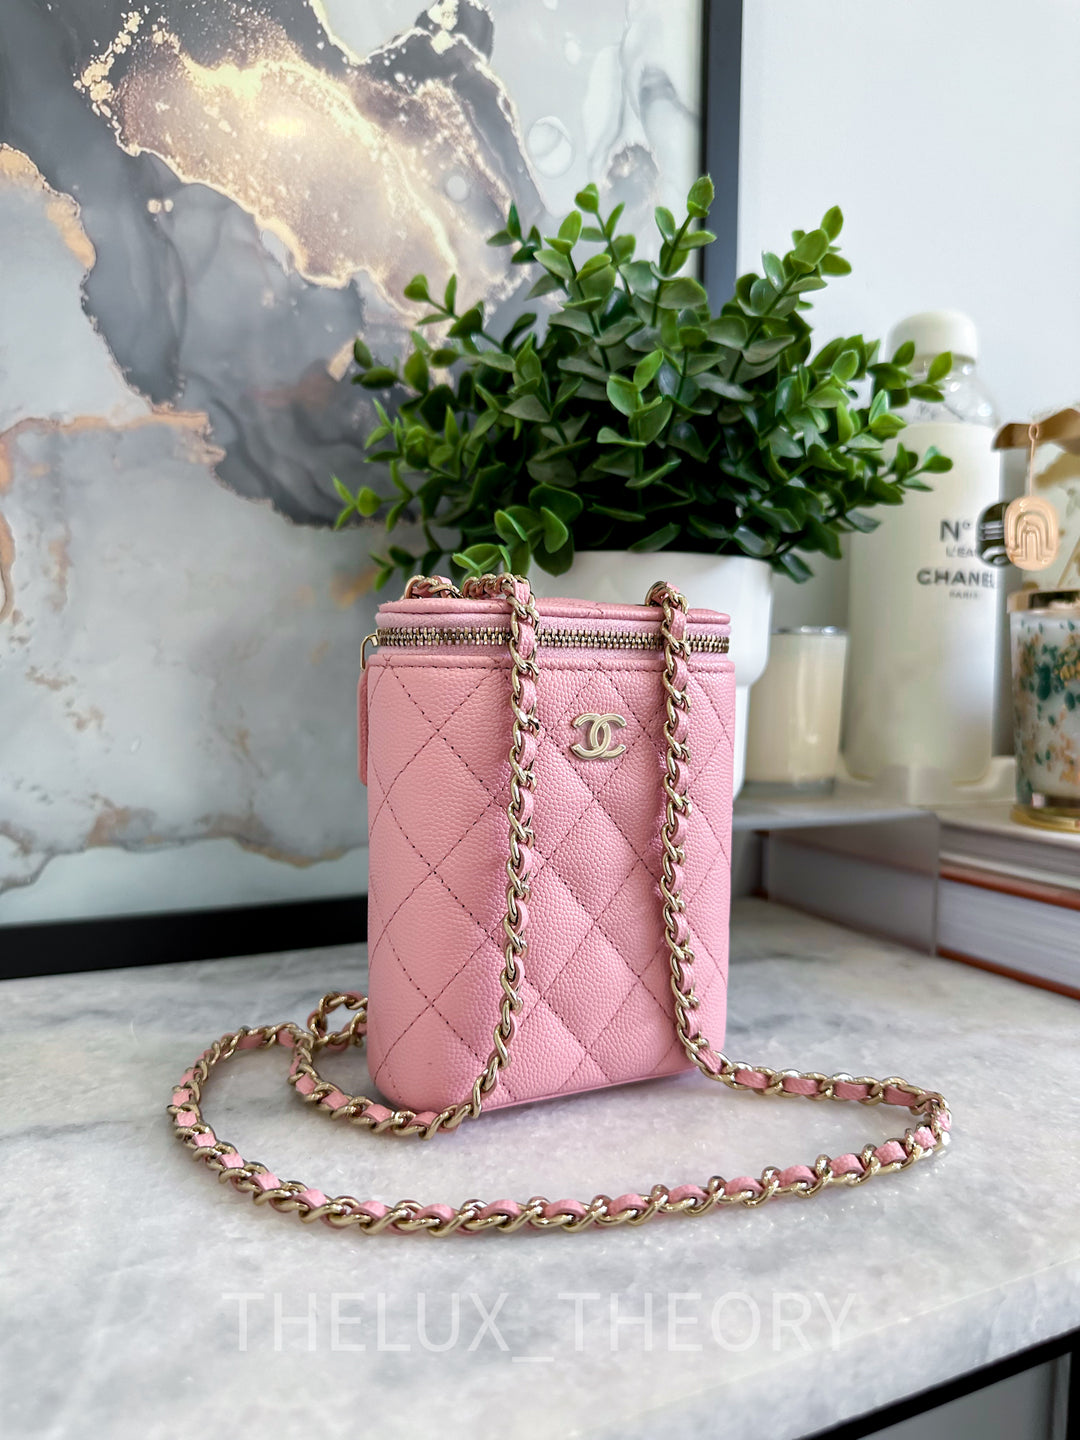 22C PINK VERTICAL CLUTCH WITH CHAIN CAVIAR LIGHT GOLD HARDWARE